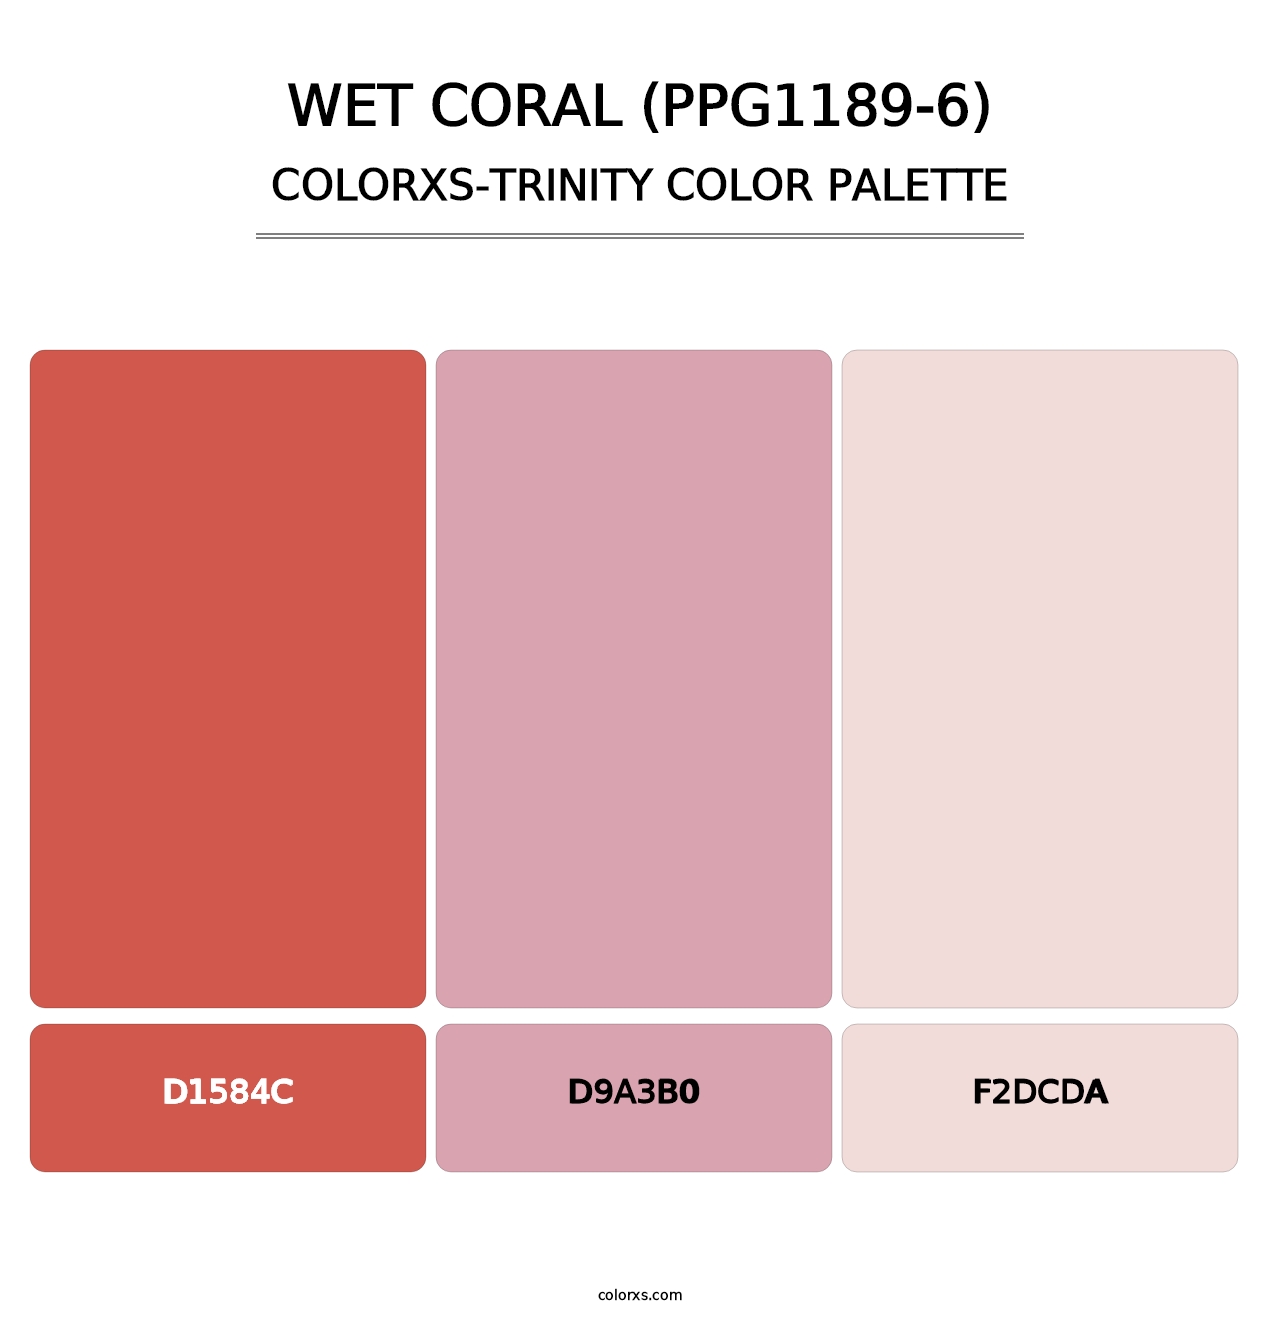 Wet Coral (PPG1189-6) - Colorxs Trinity Palette